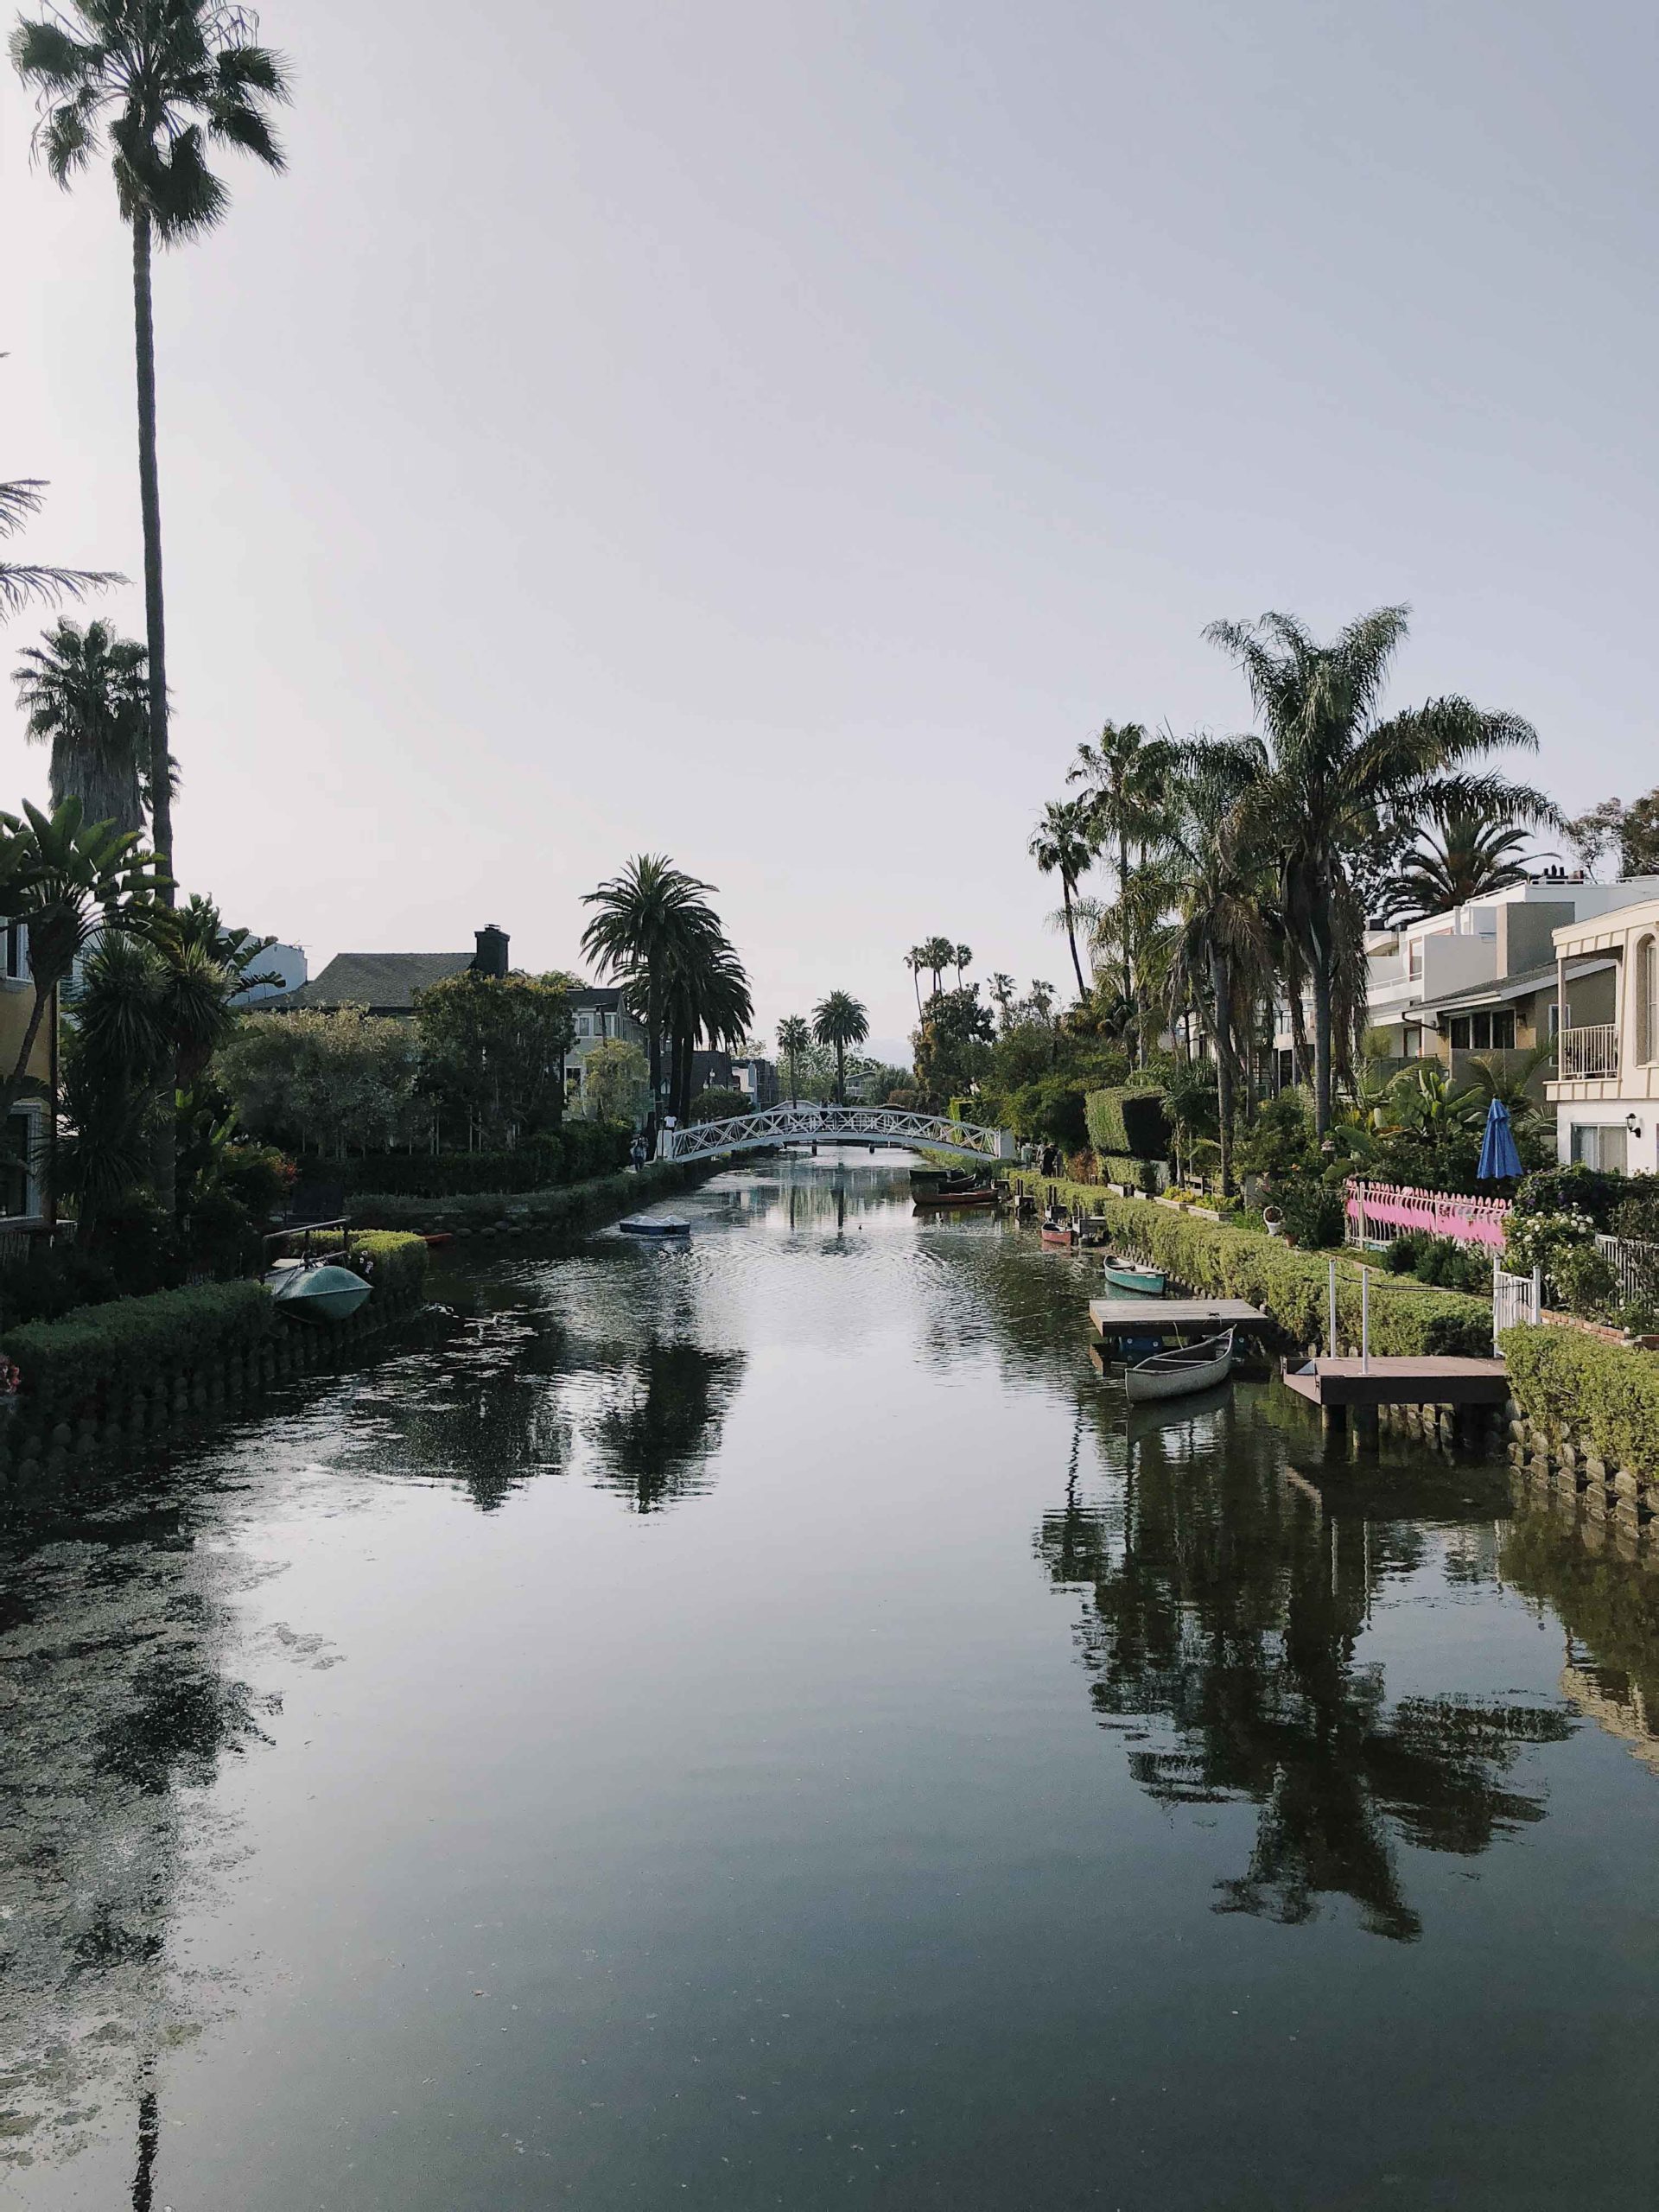 Venice Canals - Visit Venice Beach Venice Beach Inspiration by French fashion blogger julia comil in Los Angeles